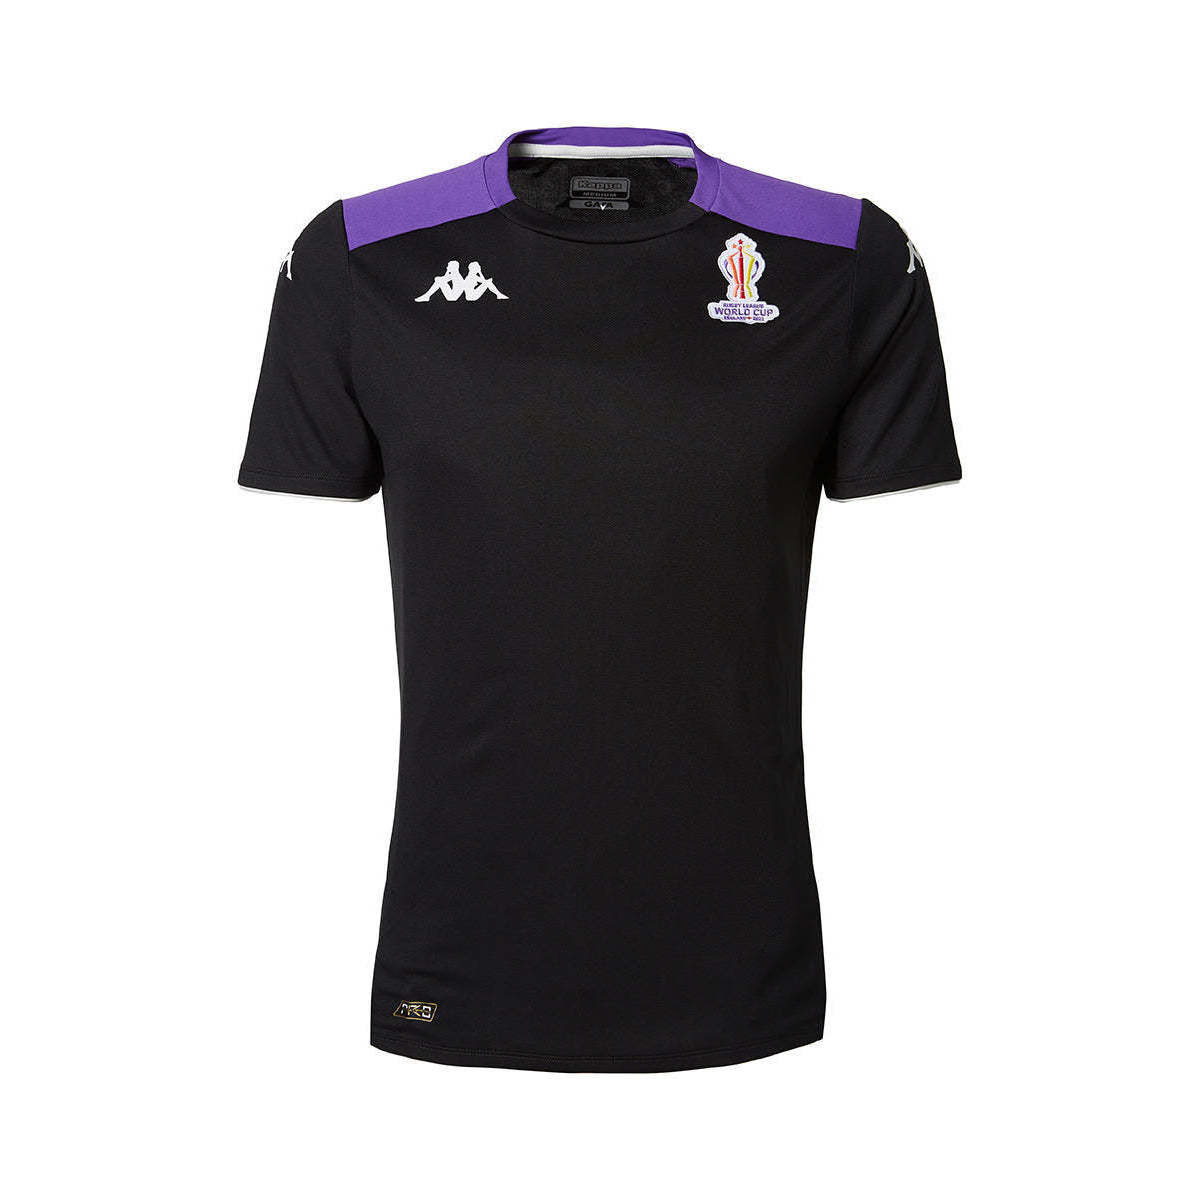 Kappa Noir Maillot Abou Pro 5 Rugby World Cup h9kea1vw